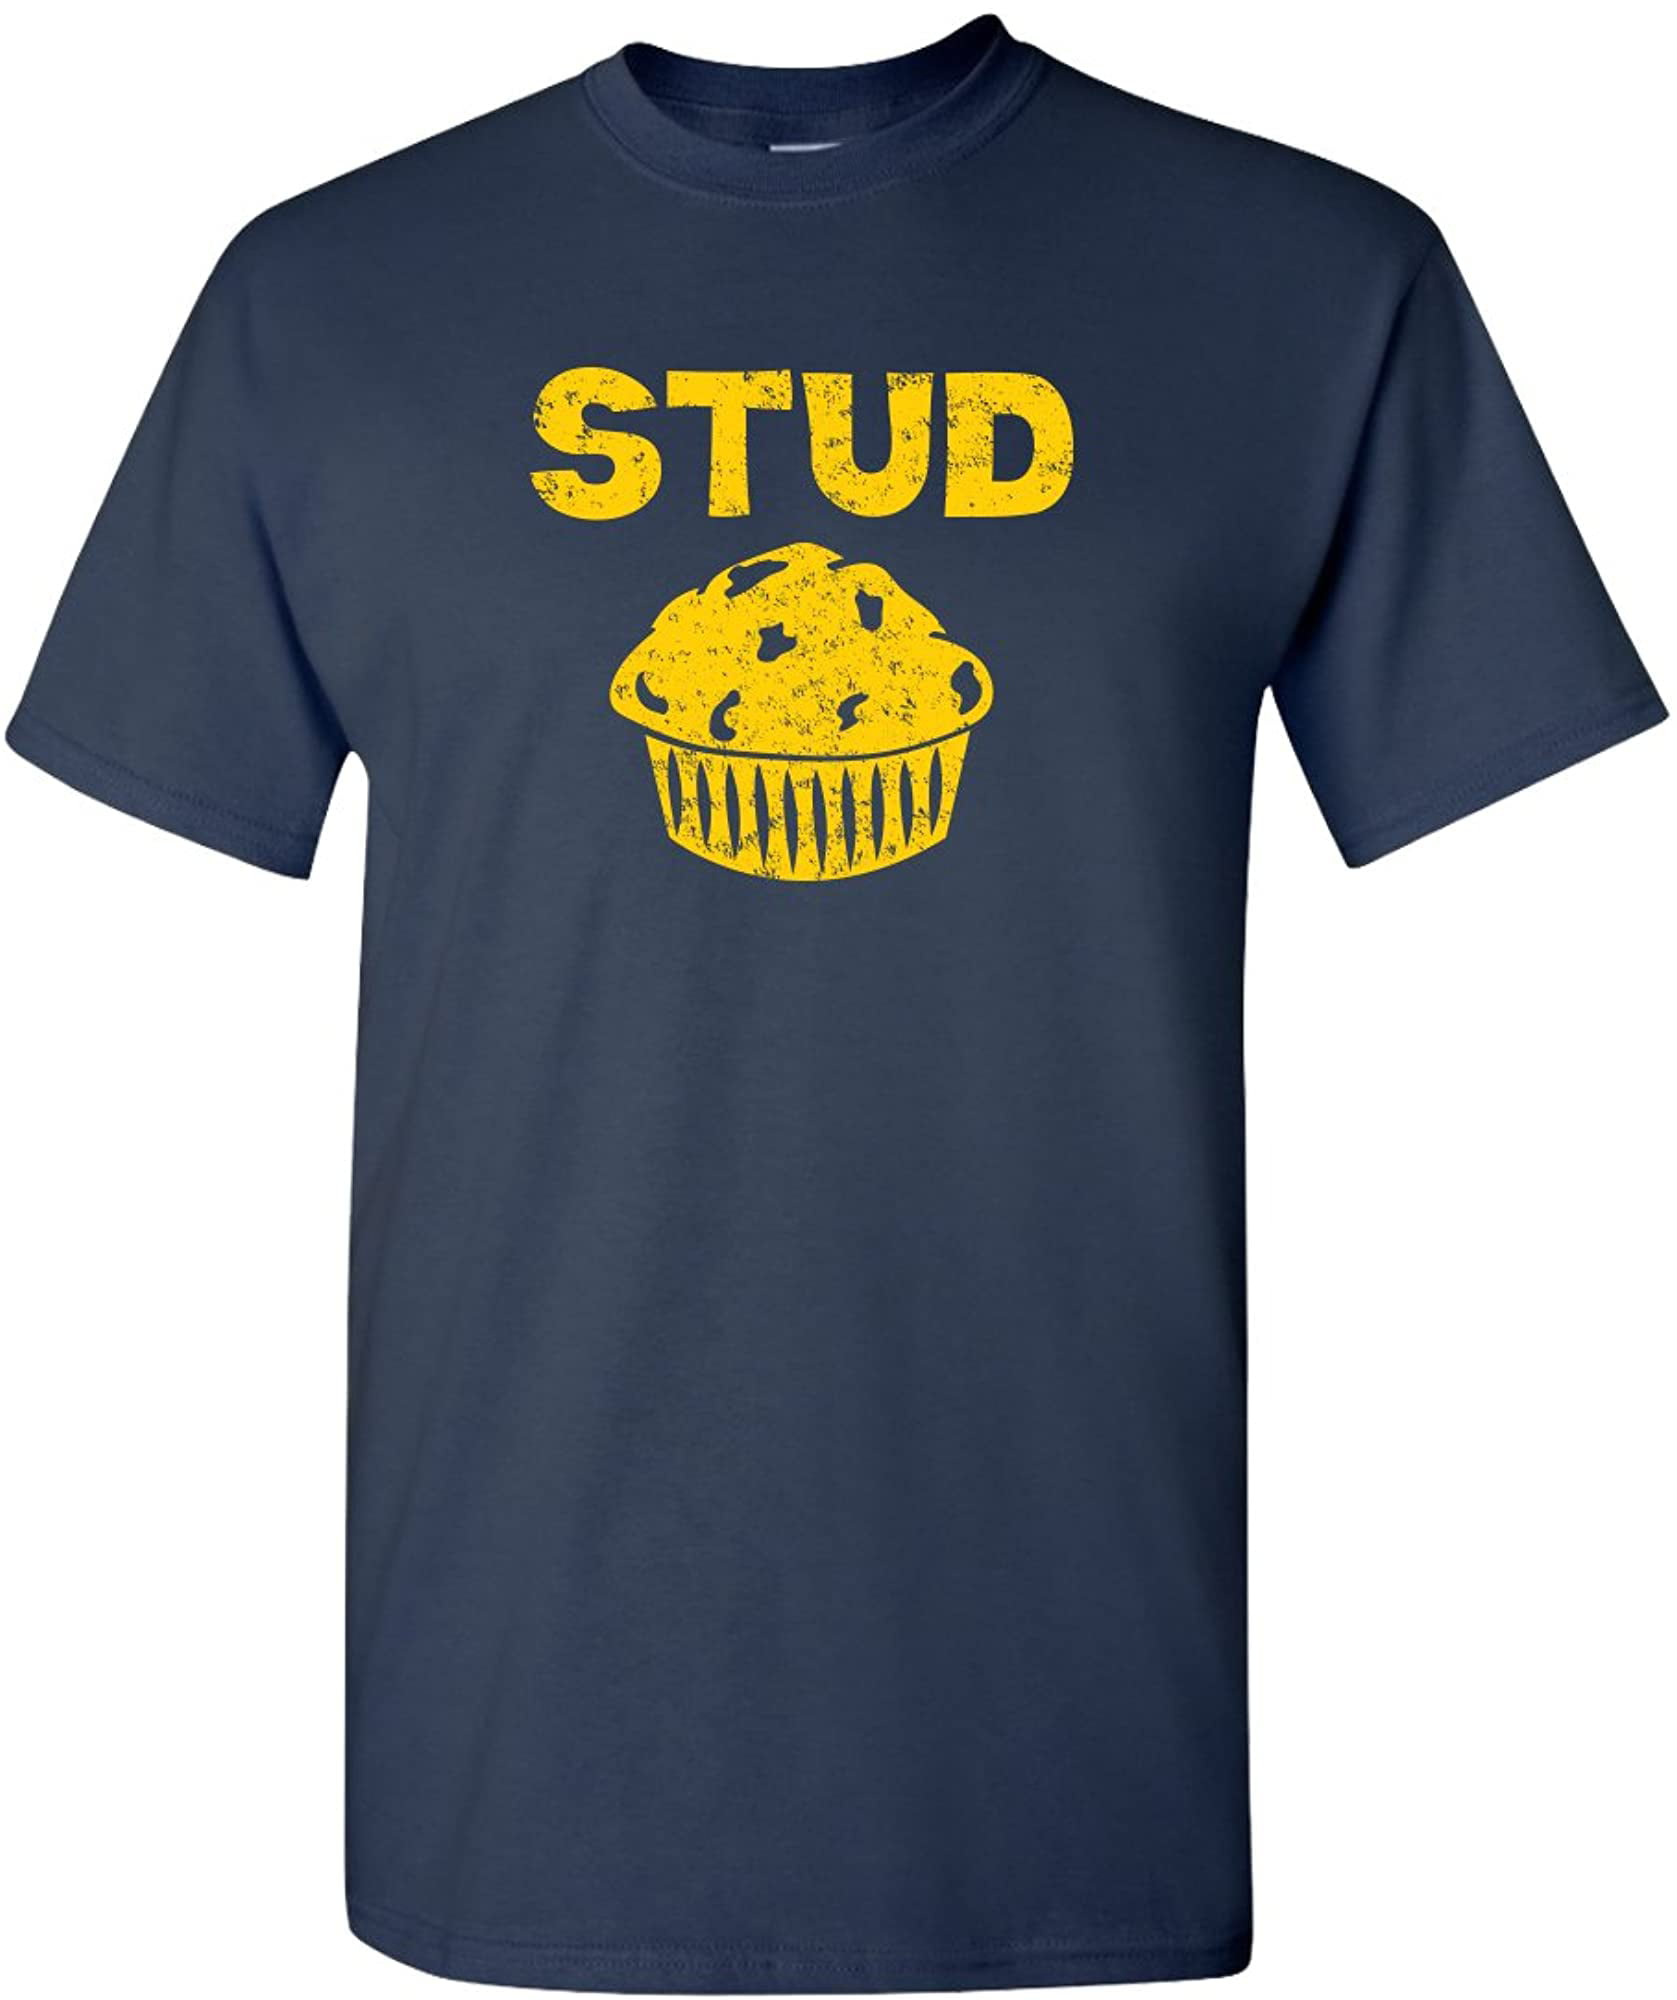 Thread Science Stud Muffin Funny Workout Exercise Fitness Humor Muscle Adult Men’s T-Shirt